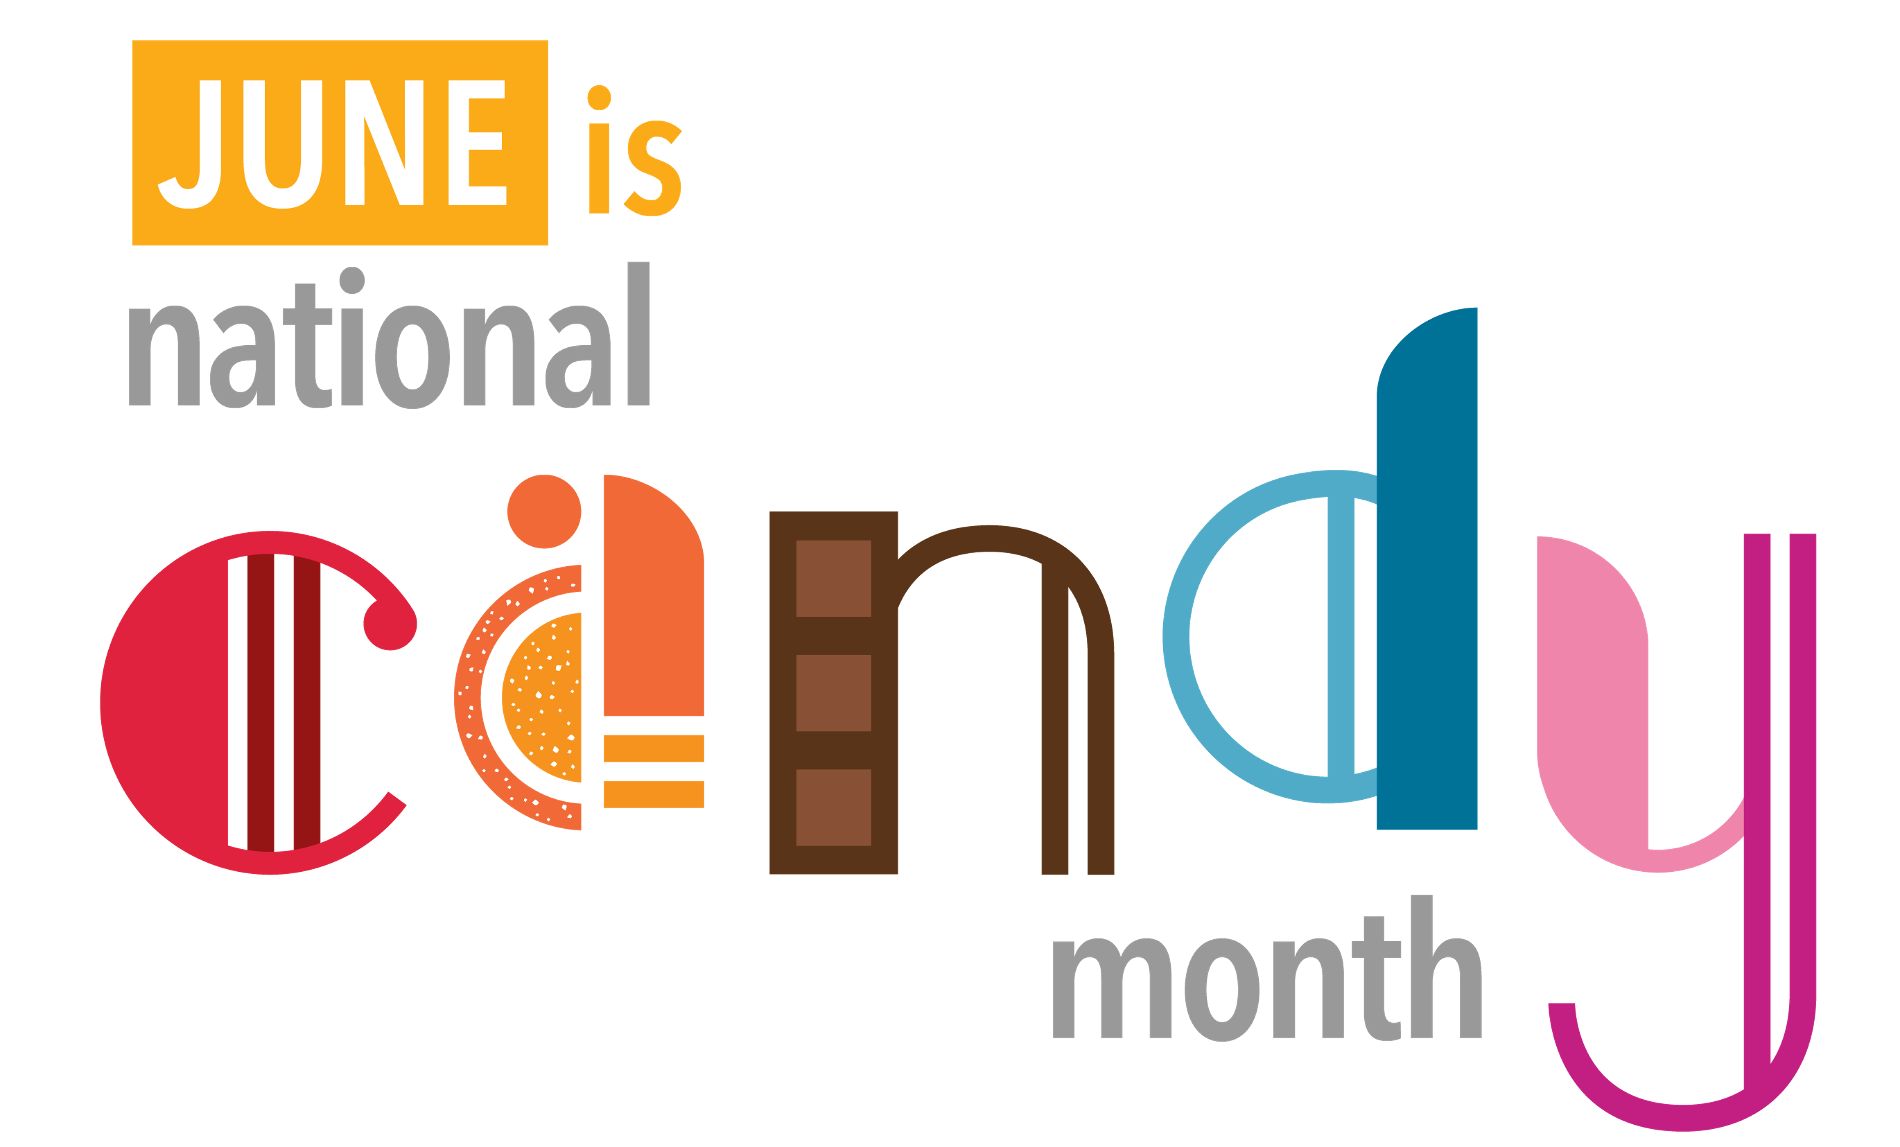 National Candy Month logo